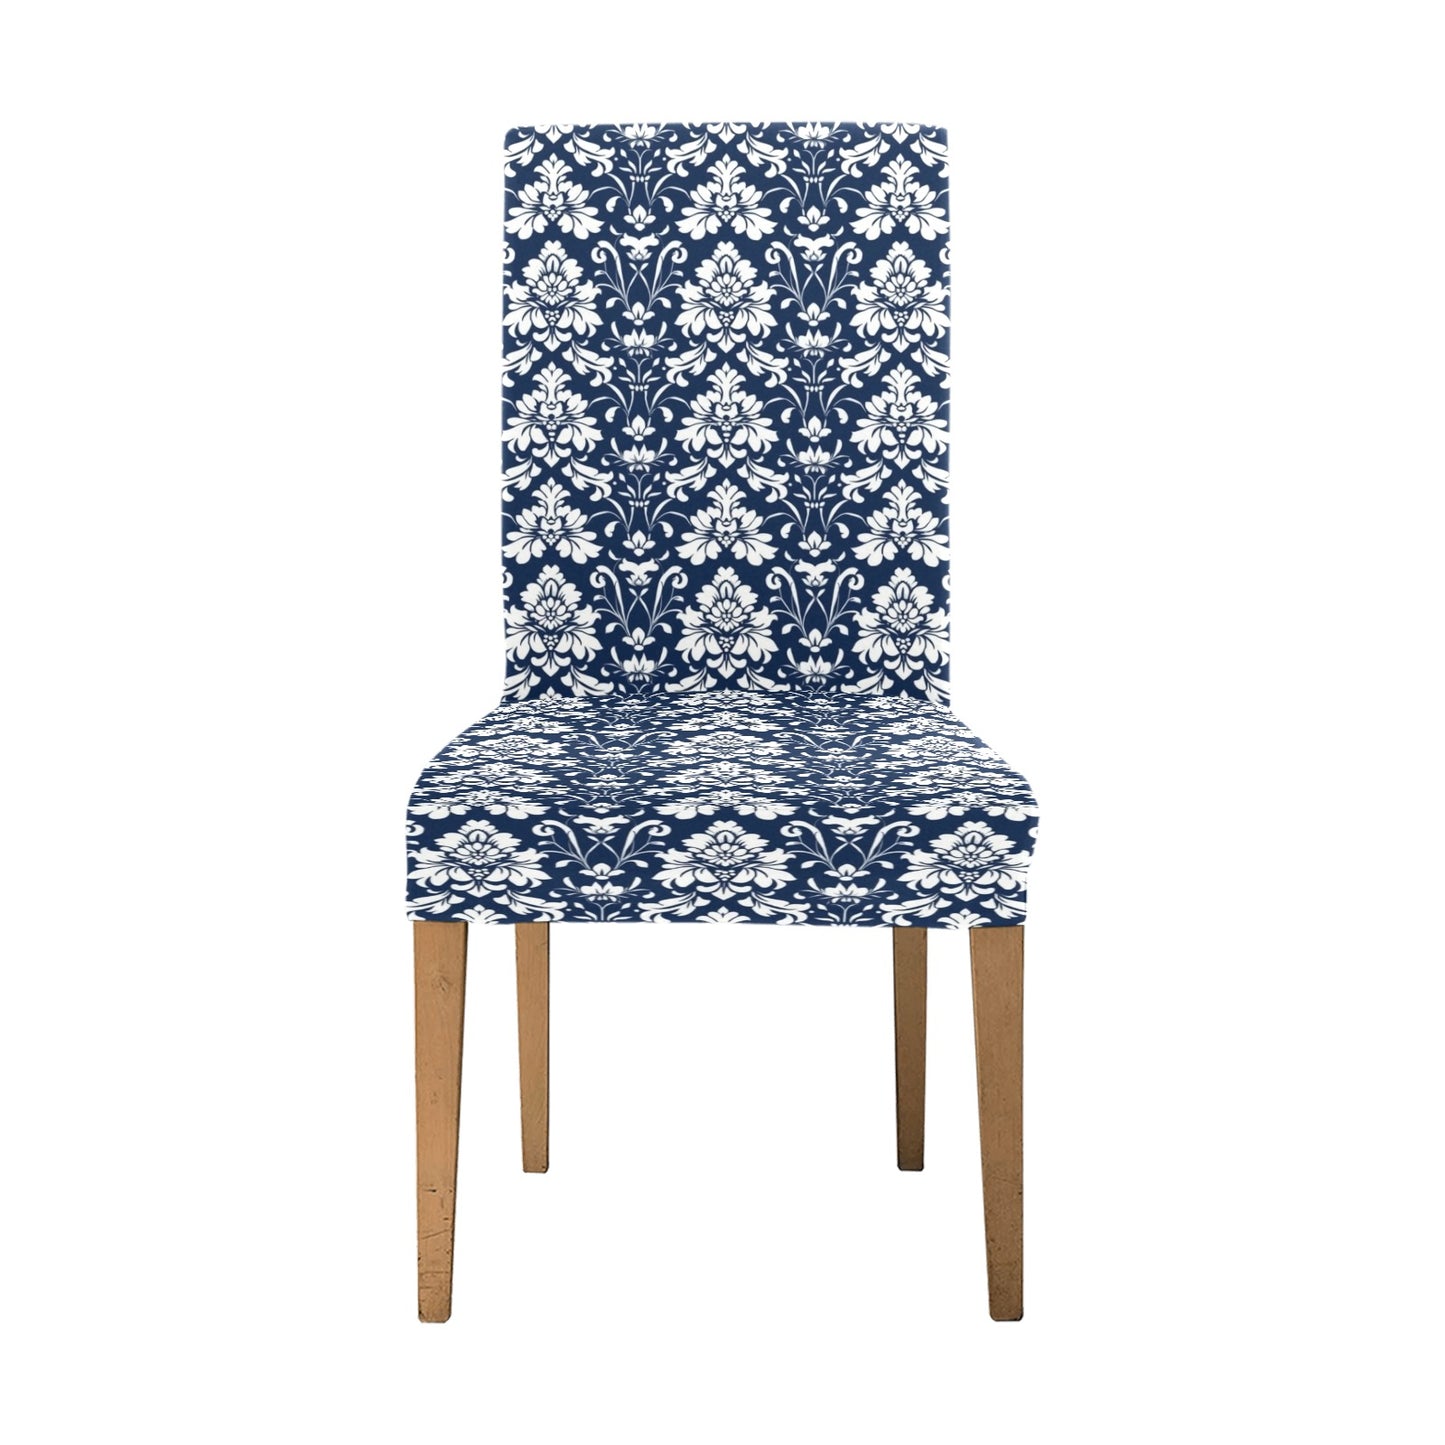 Navy Damask Dining Chair Seat Covers, Blue White Floral Stretch Slipcover Furniture Dining Room Party Banquet Home Decor Spandex Starcove Fashion